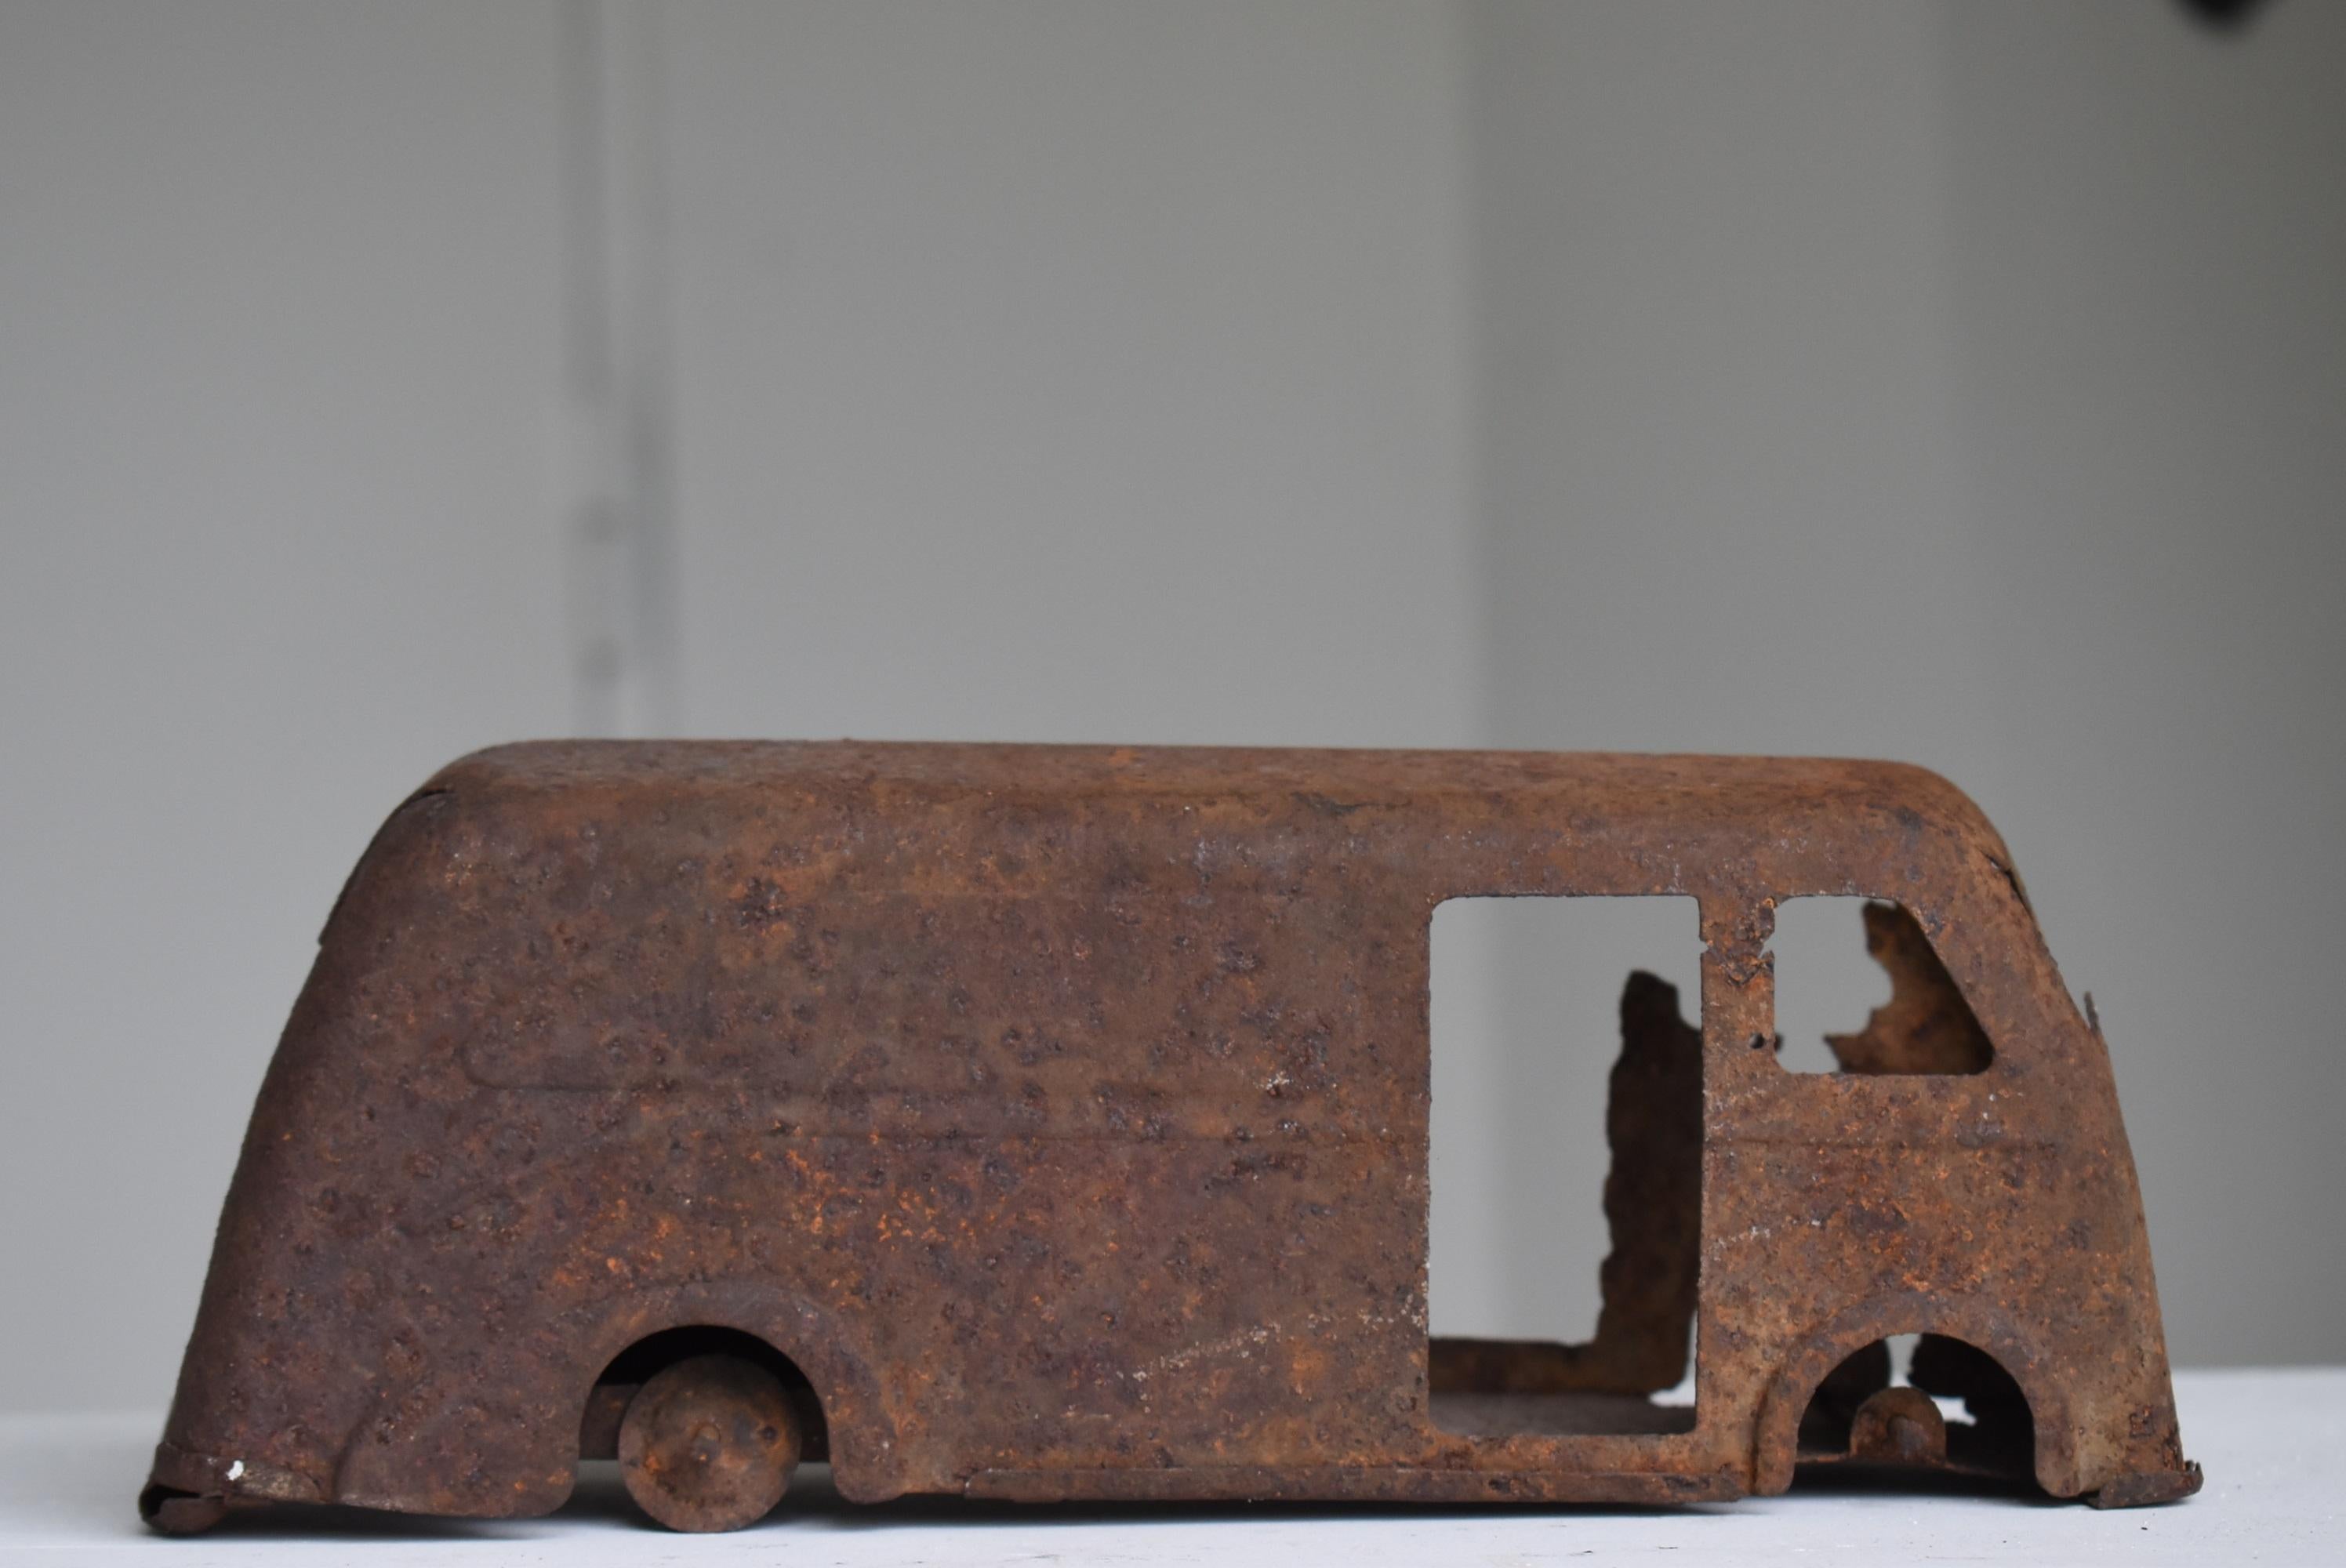 20th Century Japanese Old Rusted Car Toys 1940s-1970s/Vintage Iron Object Figurine Wabisabi